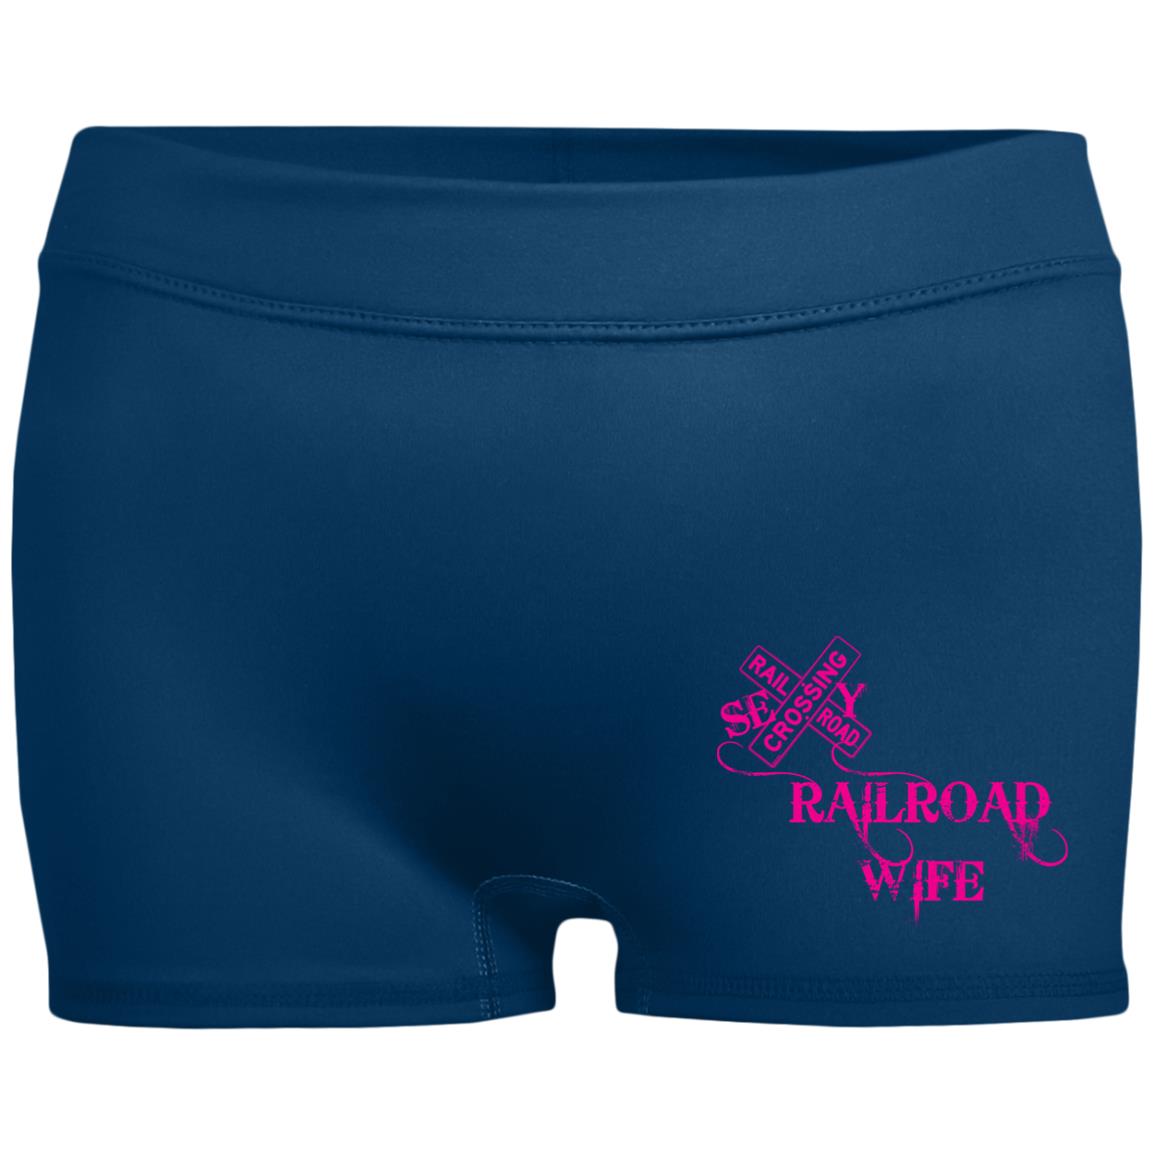 Sexy Railroad Wife Ladies' Fitted Moisture-Wicking 2.5 inch Inseam Shorts